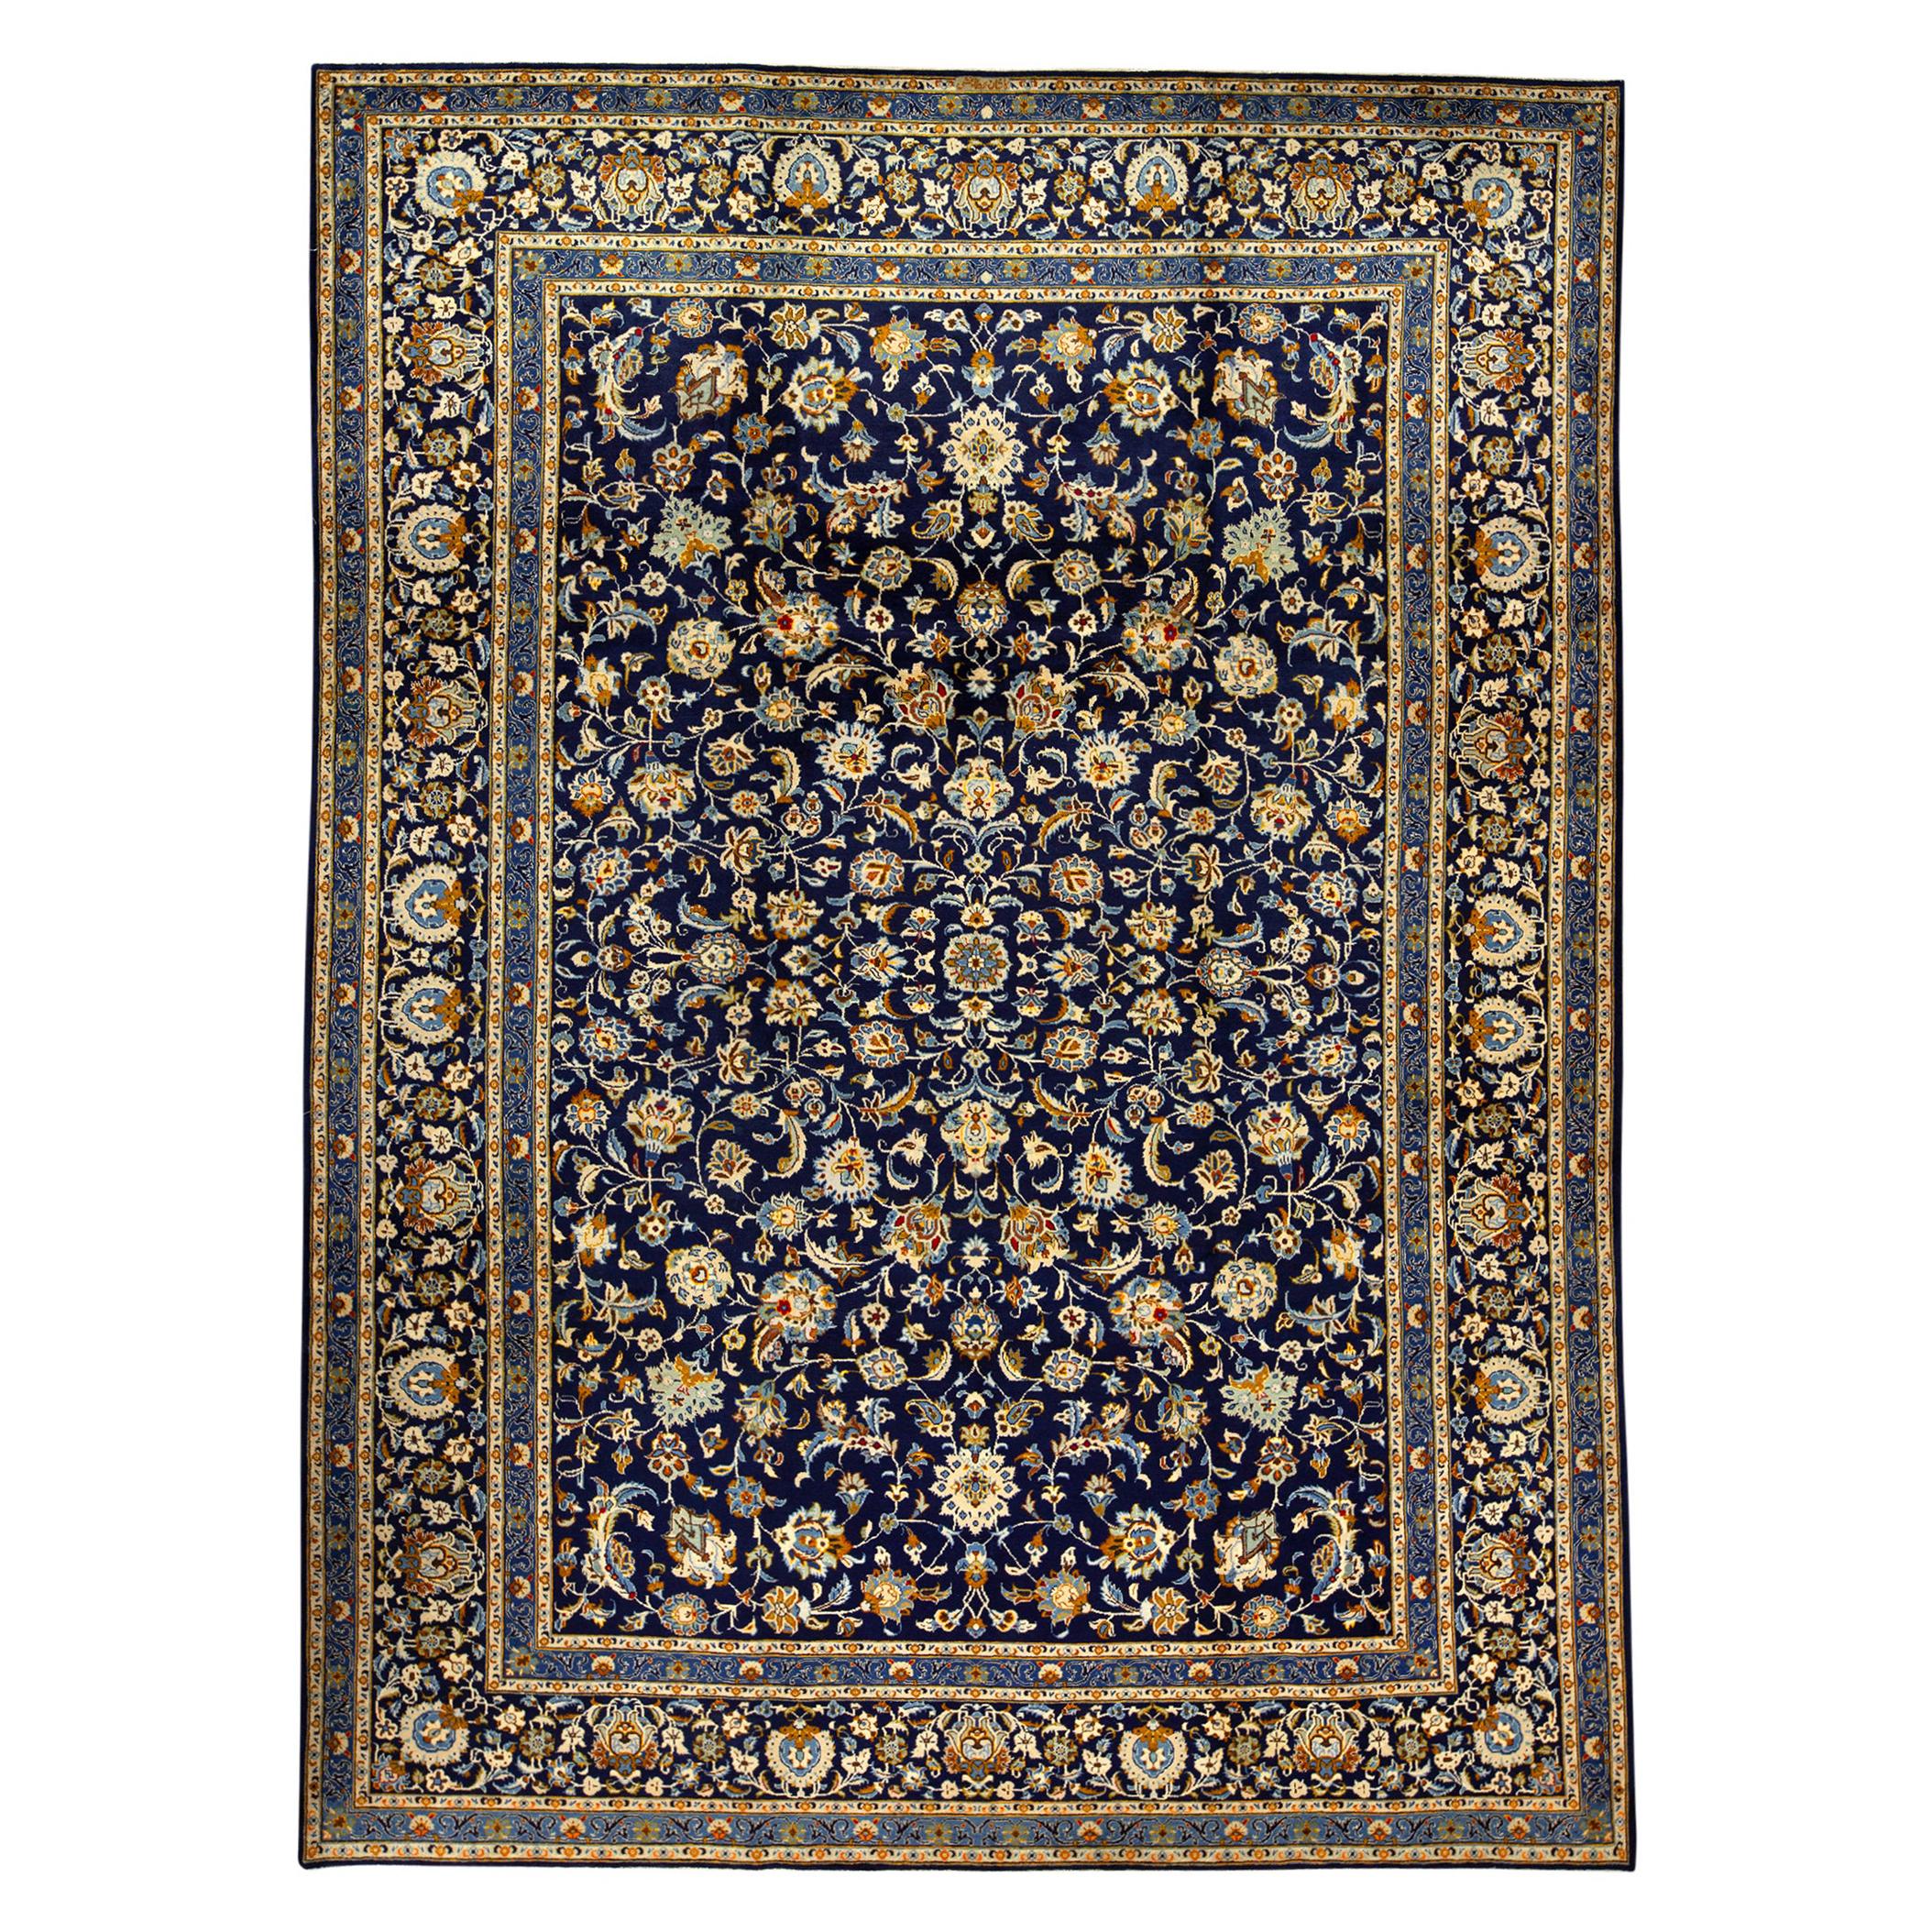   Antique Persian Fine Traditional Handwoven Luxury Wool Navy Rug